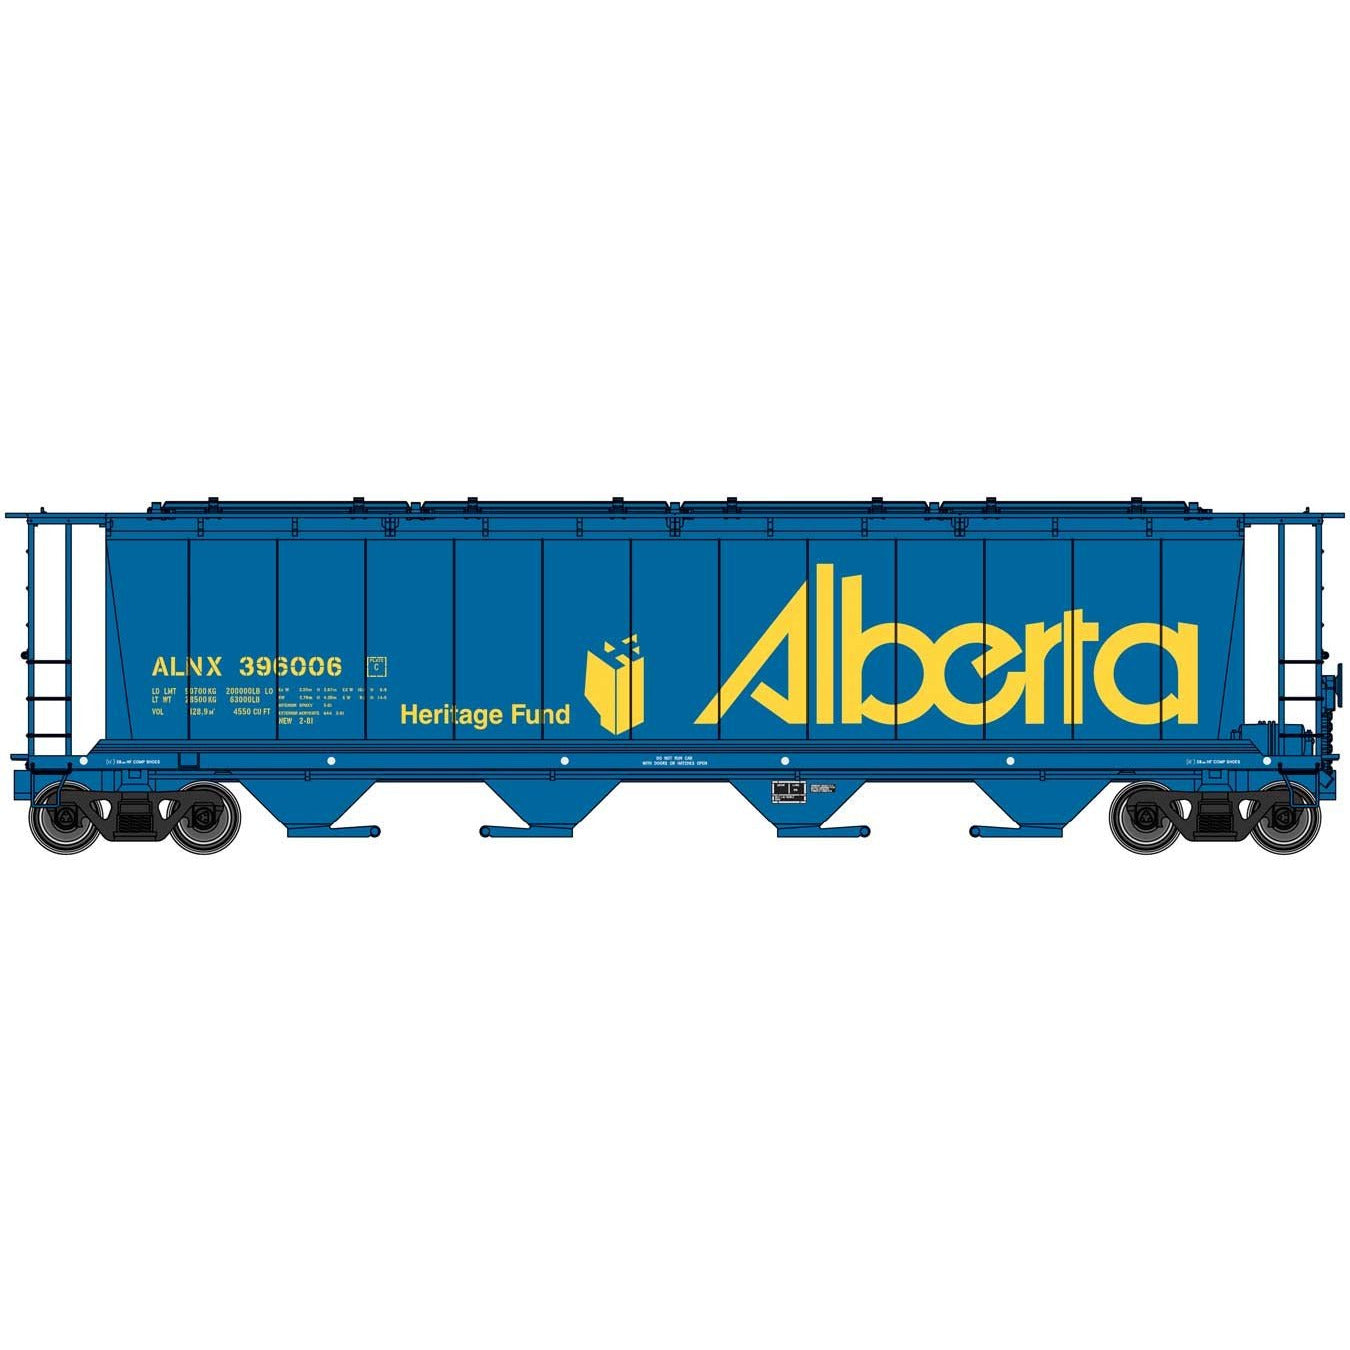 59' Cylindrical Hopper - Ready to Run -- Alberta ALNX #396006 (blue, yellow; Heritage Fund Logo, Large Name)